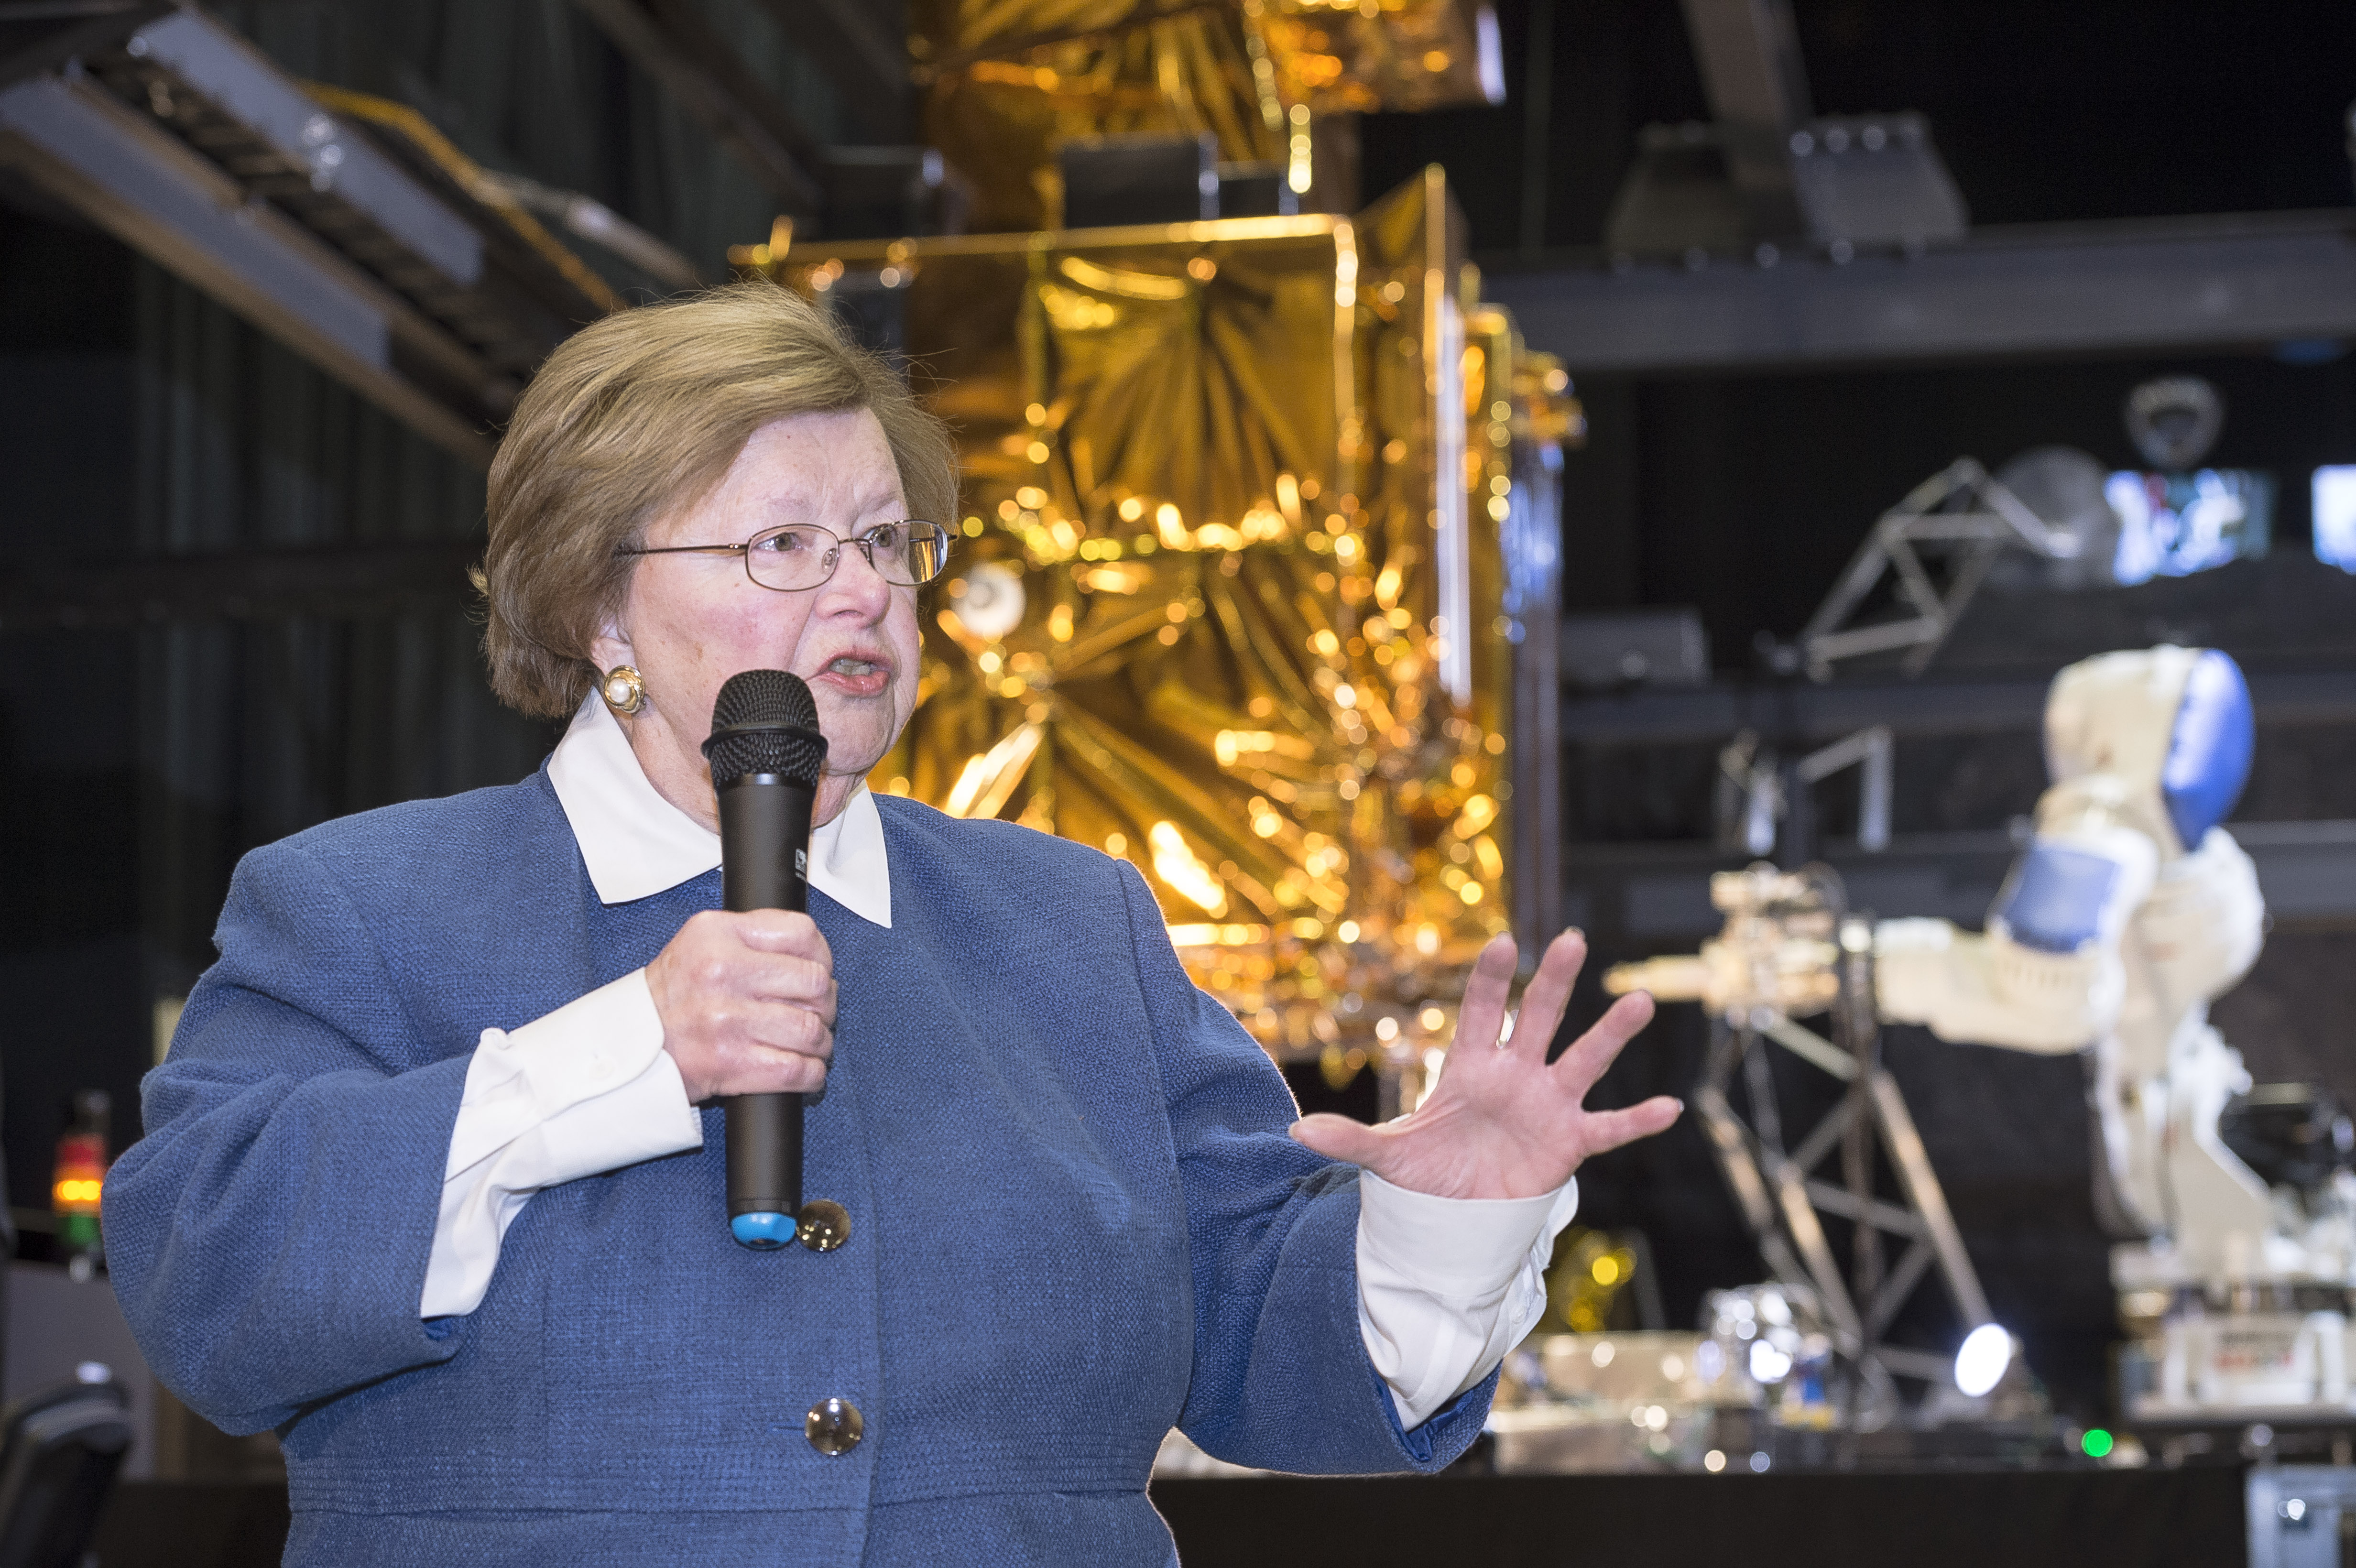 Sen. Barbara Mikulski participated in a ribbon cutting at NASA’s Goddard Space Flight Center on January 6th, 2016, to officially open the new Robotic Operations Center (ROC) developed by the Satellite Servicing Capabilities Office. Within the ROC's black walls, NASA is testing technologies and operational procedures for science and exploration missions, including the Restore-L satellite servicing mission and also the Asteroid Redirect Mission. Image credit: NASA/Chris Gunn